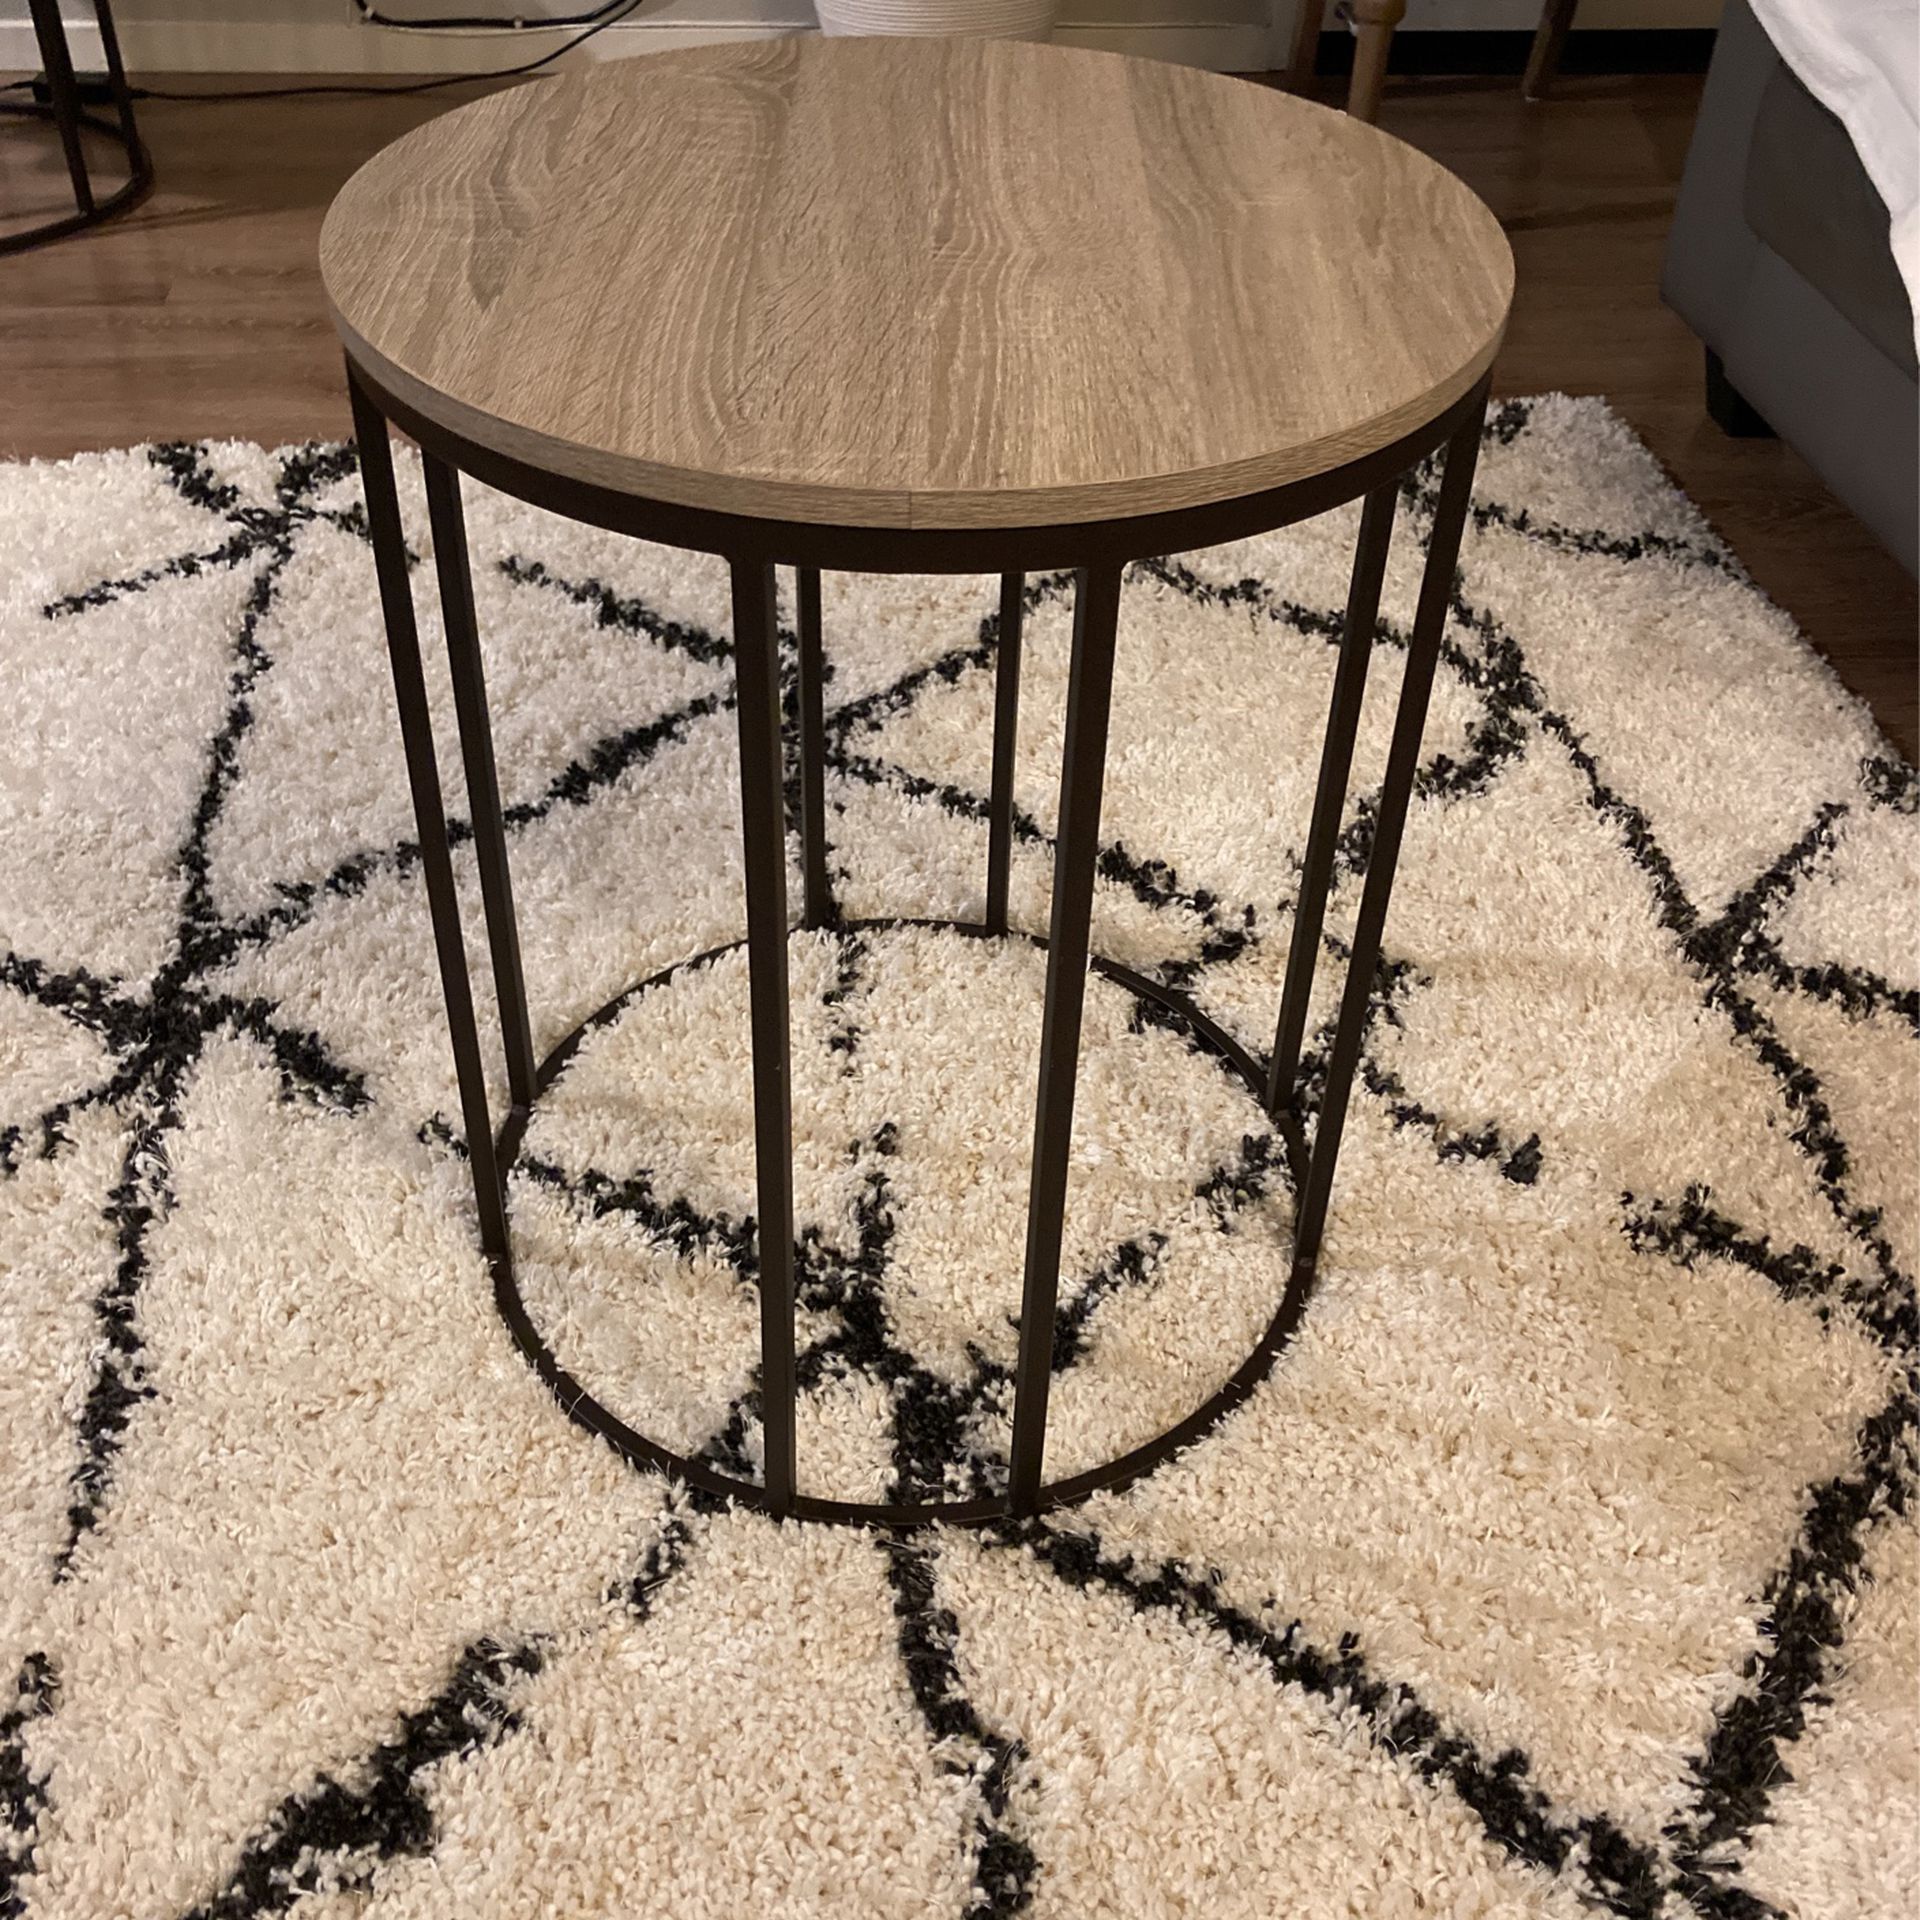 2 Matching Side Tables